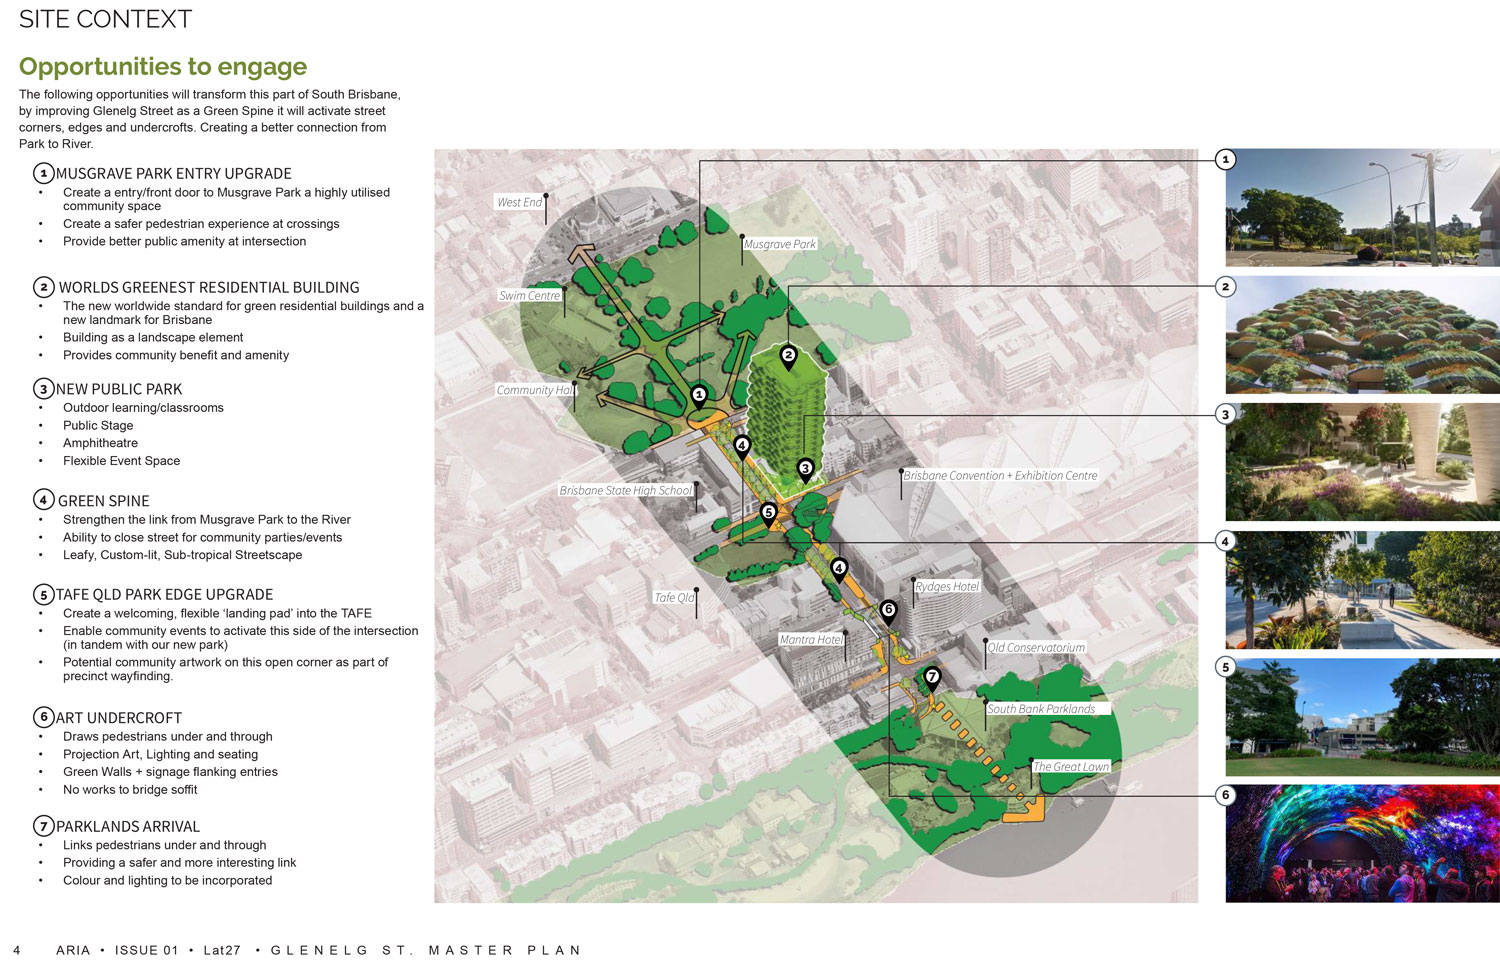 Glenelg Street green spine masterplan vision as part of Aria's Urban Forest proposal